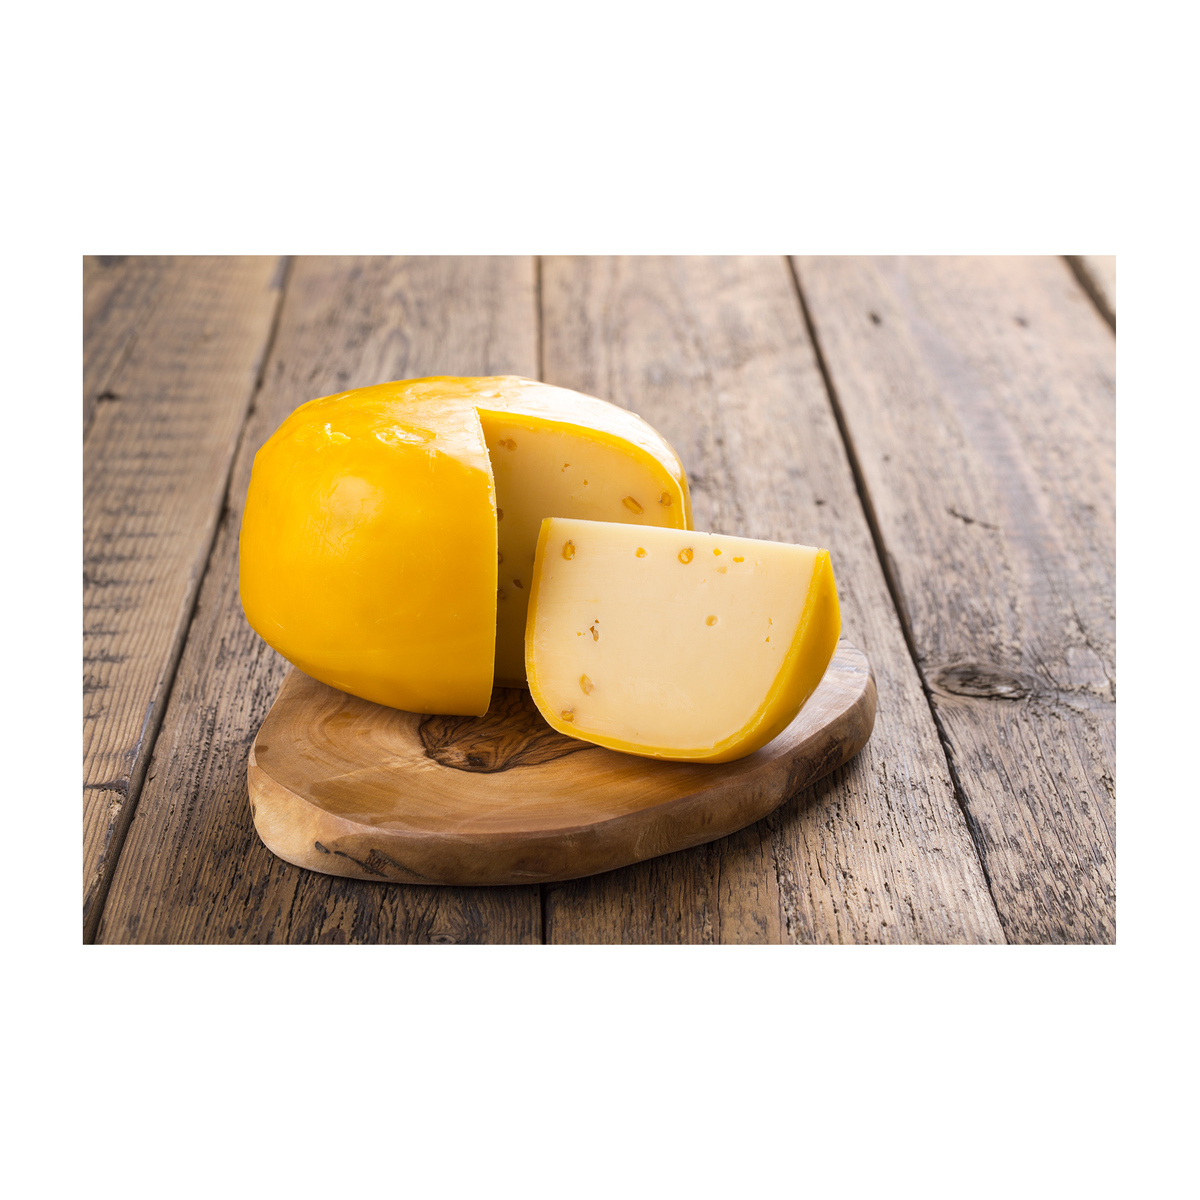 Dutch Young Gouda Cheese Slices 250g Approx. Weight